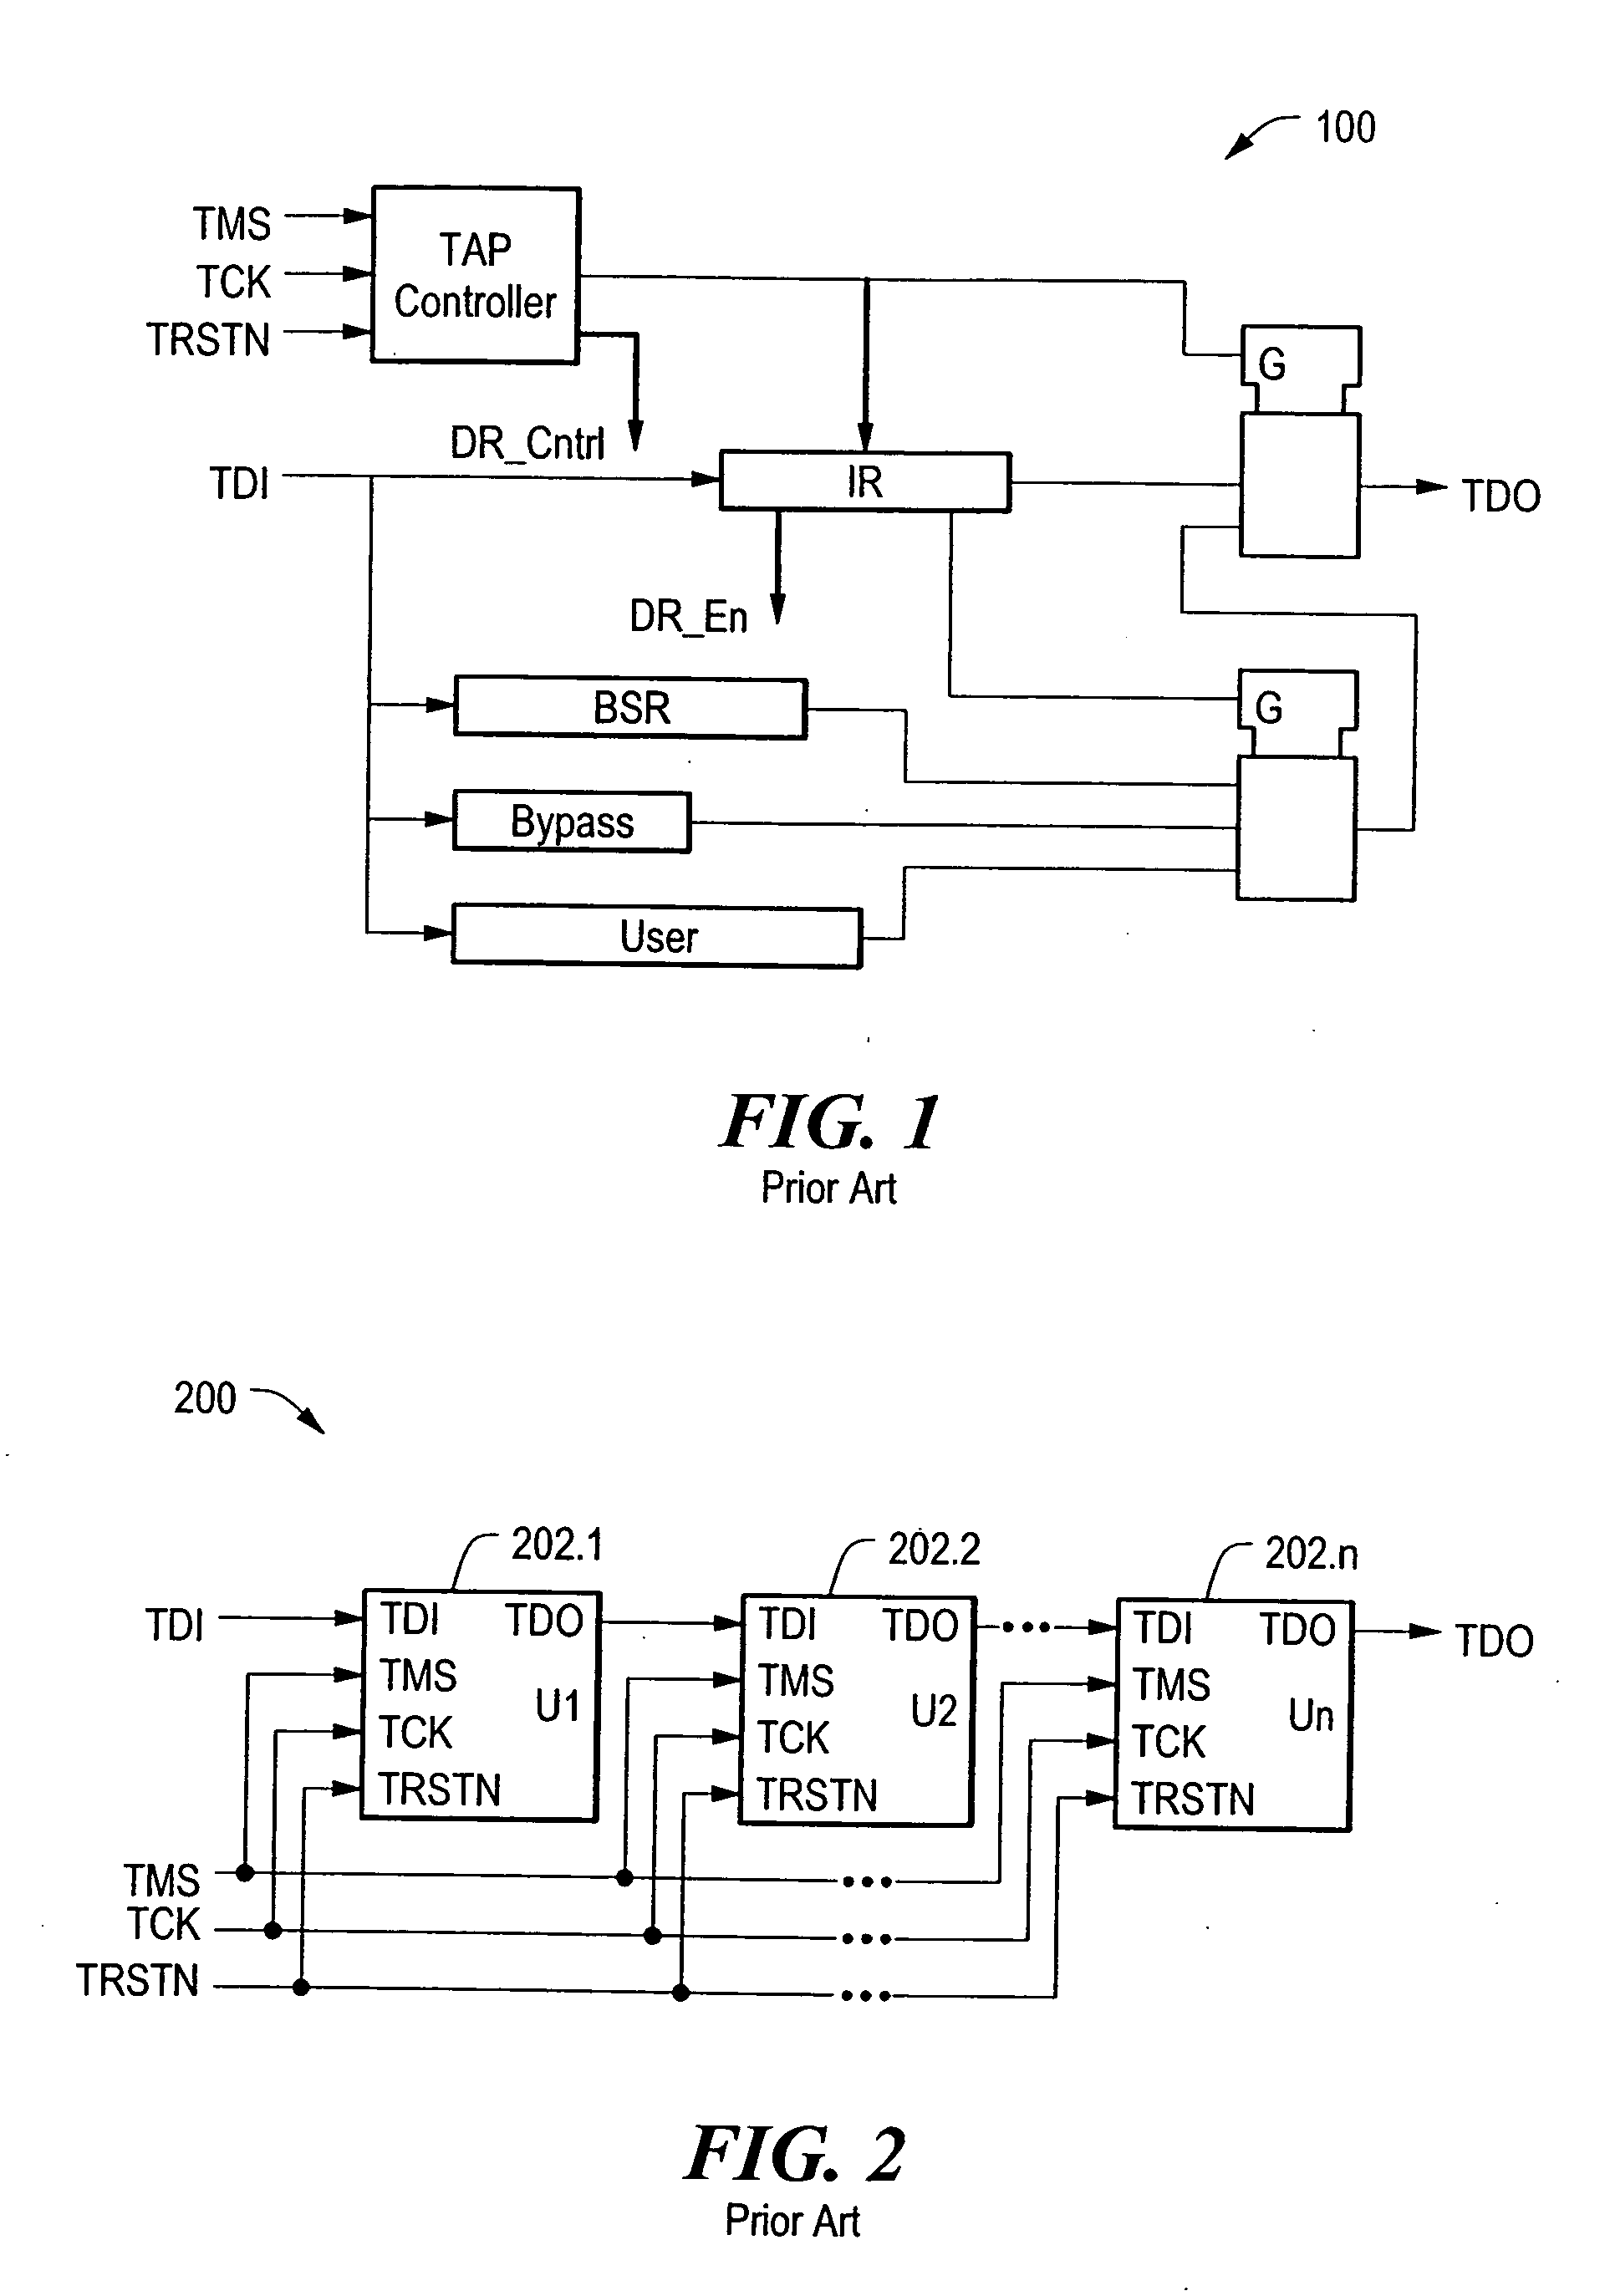 Method and apparatus for embedded Built-In Self-Test (BIST) of electronic circuits and systems